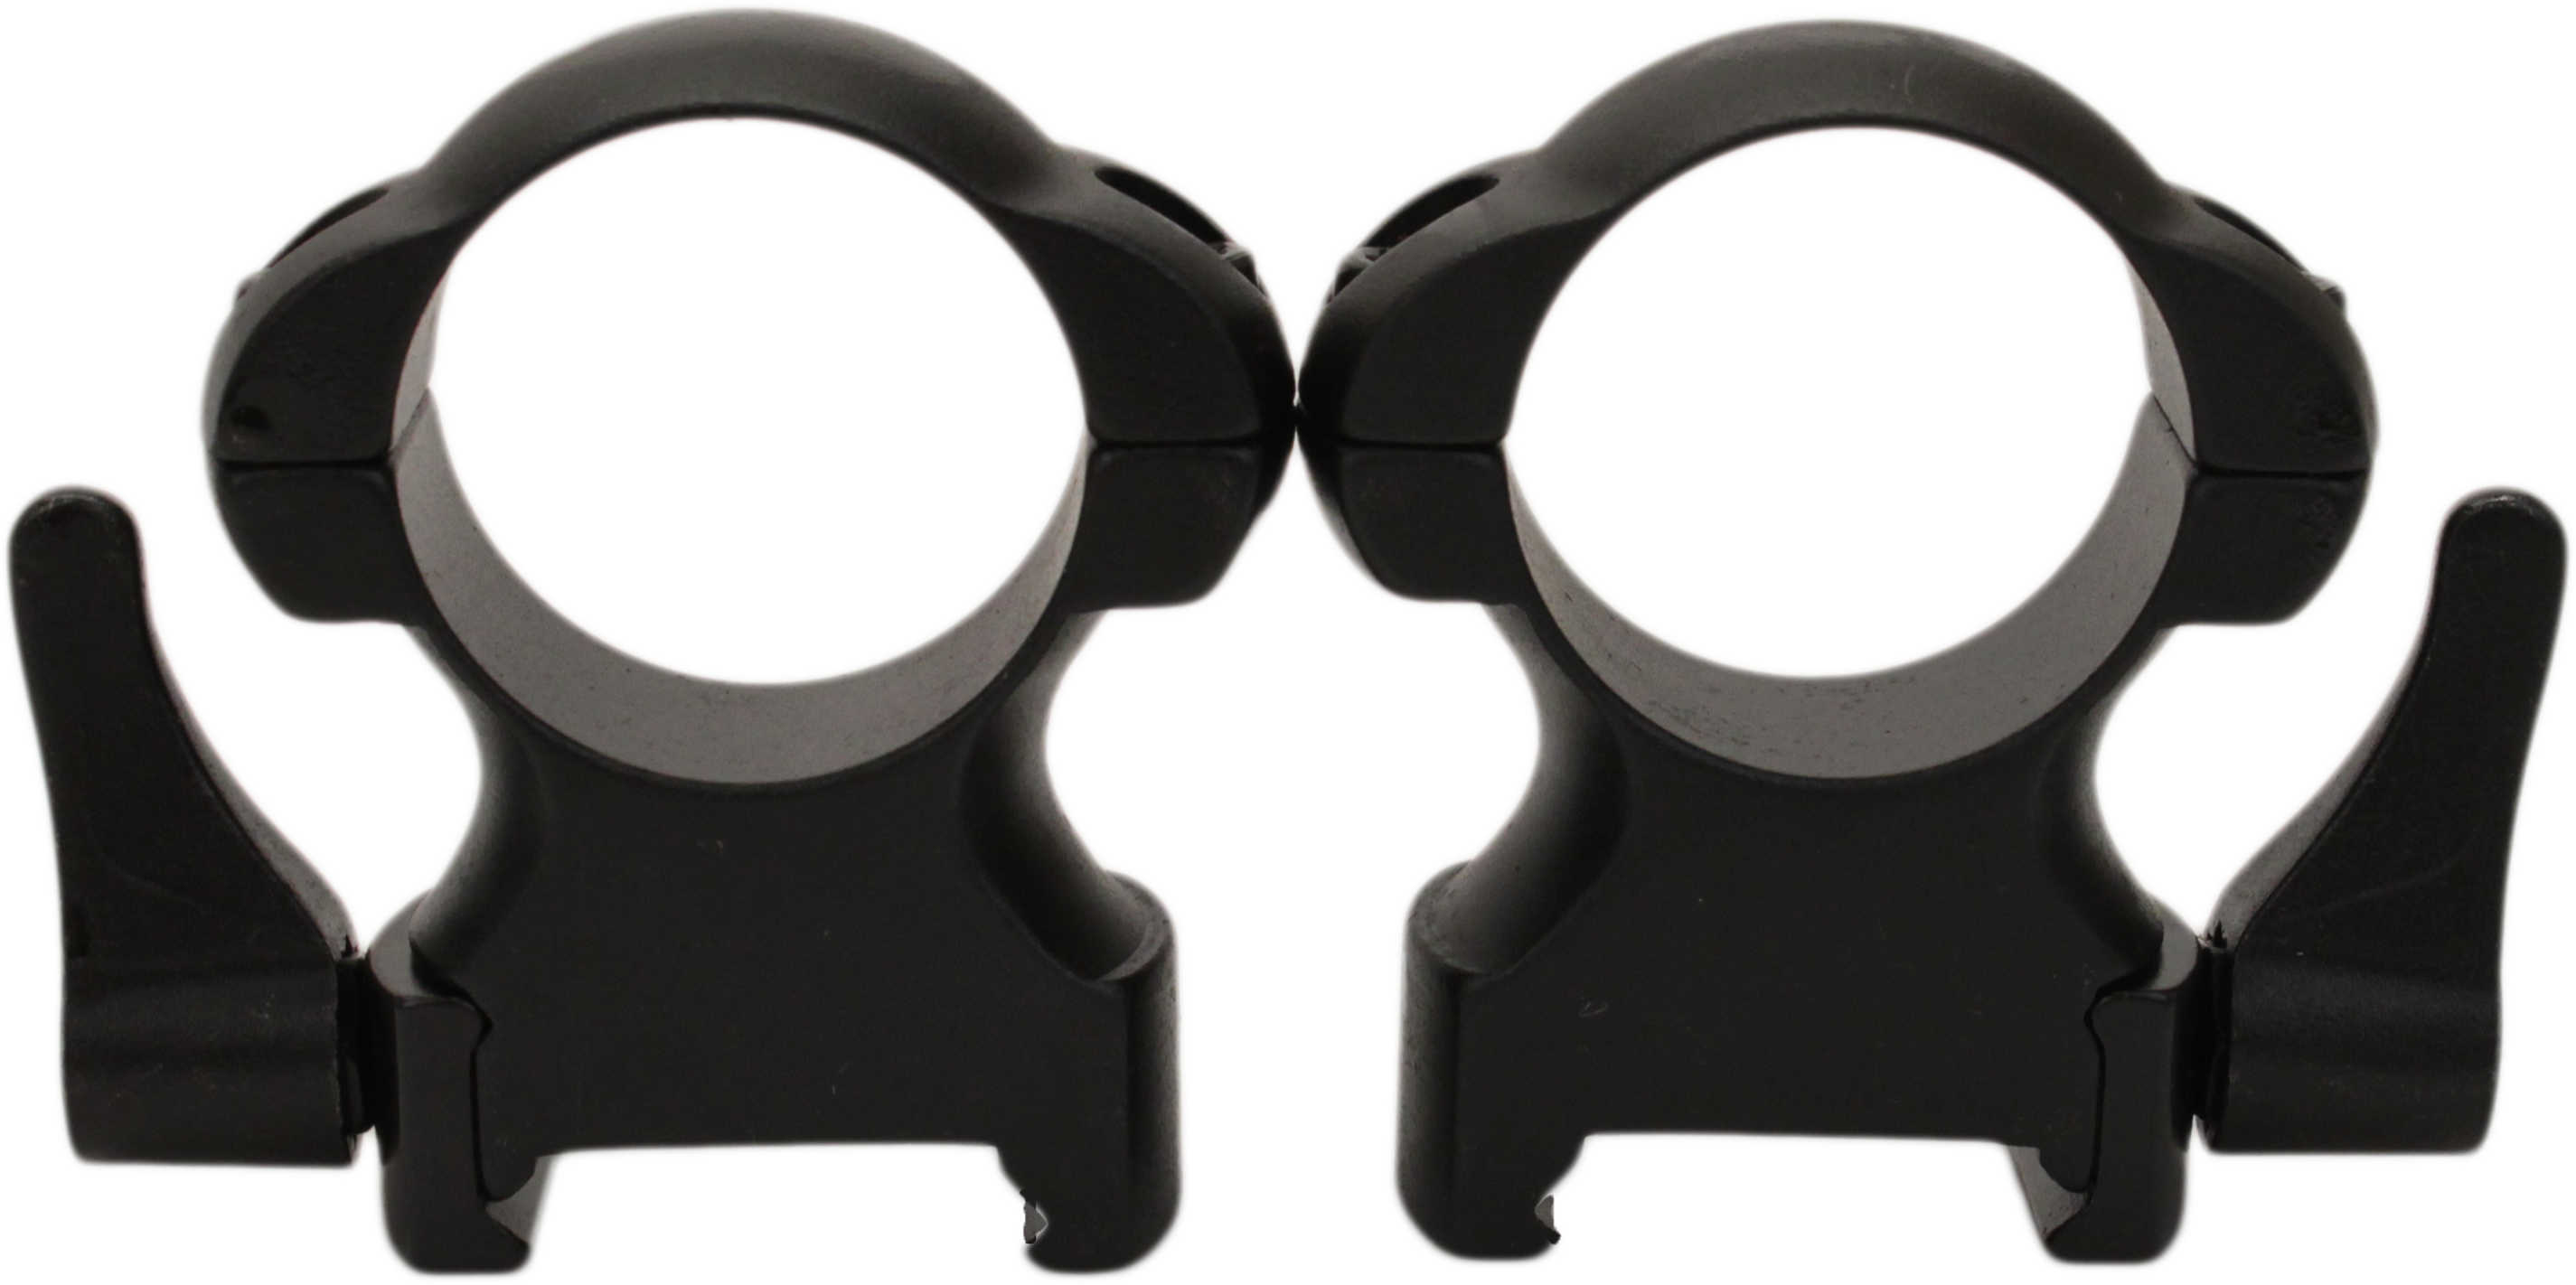 Simmons Weaver 1" Extra High Leverlok Top Rings With Matte Black Finish Md: 49327